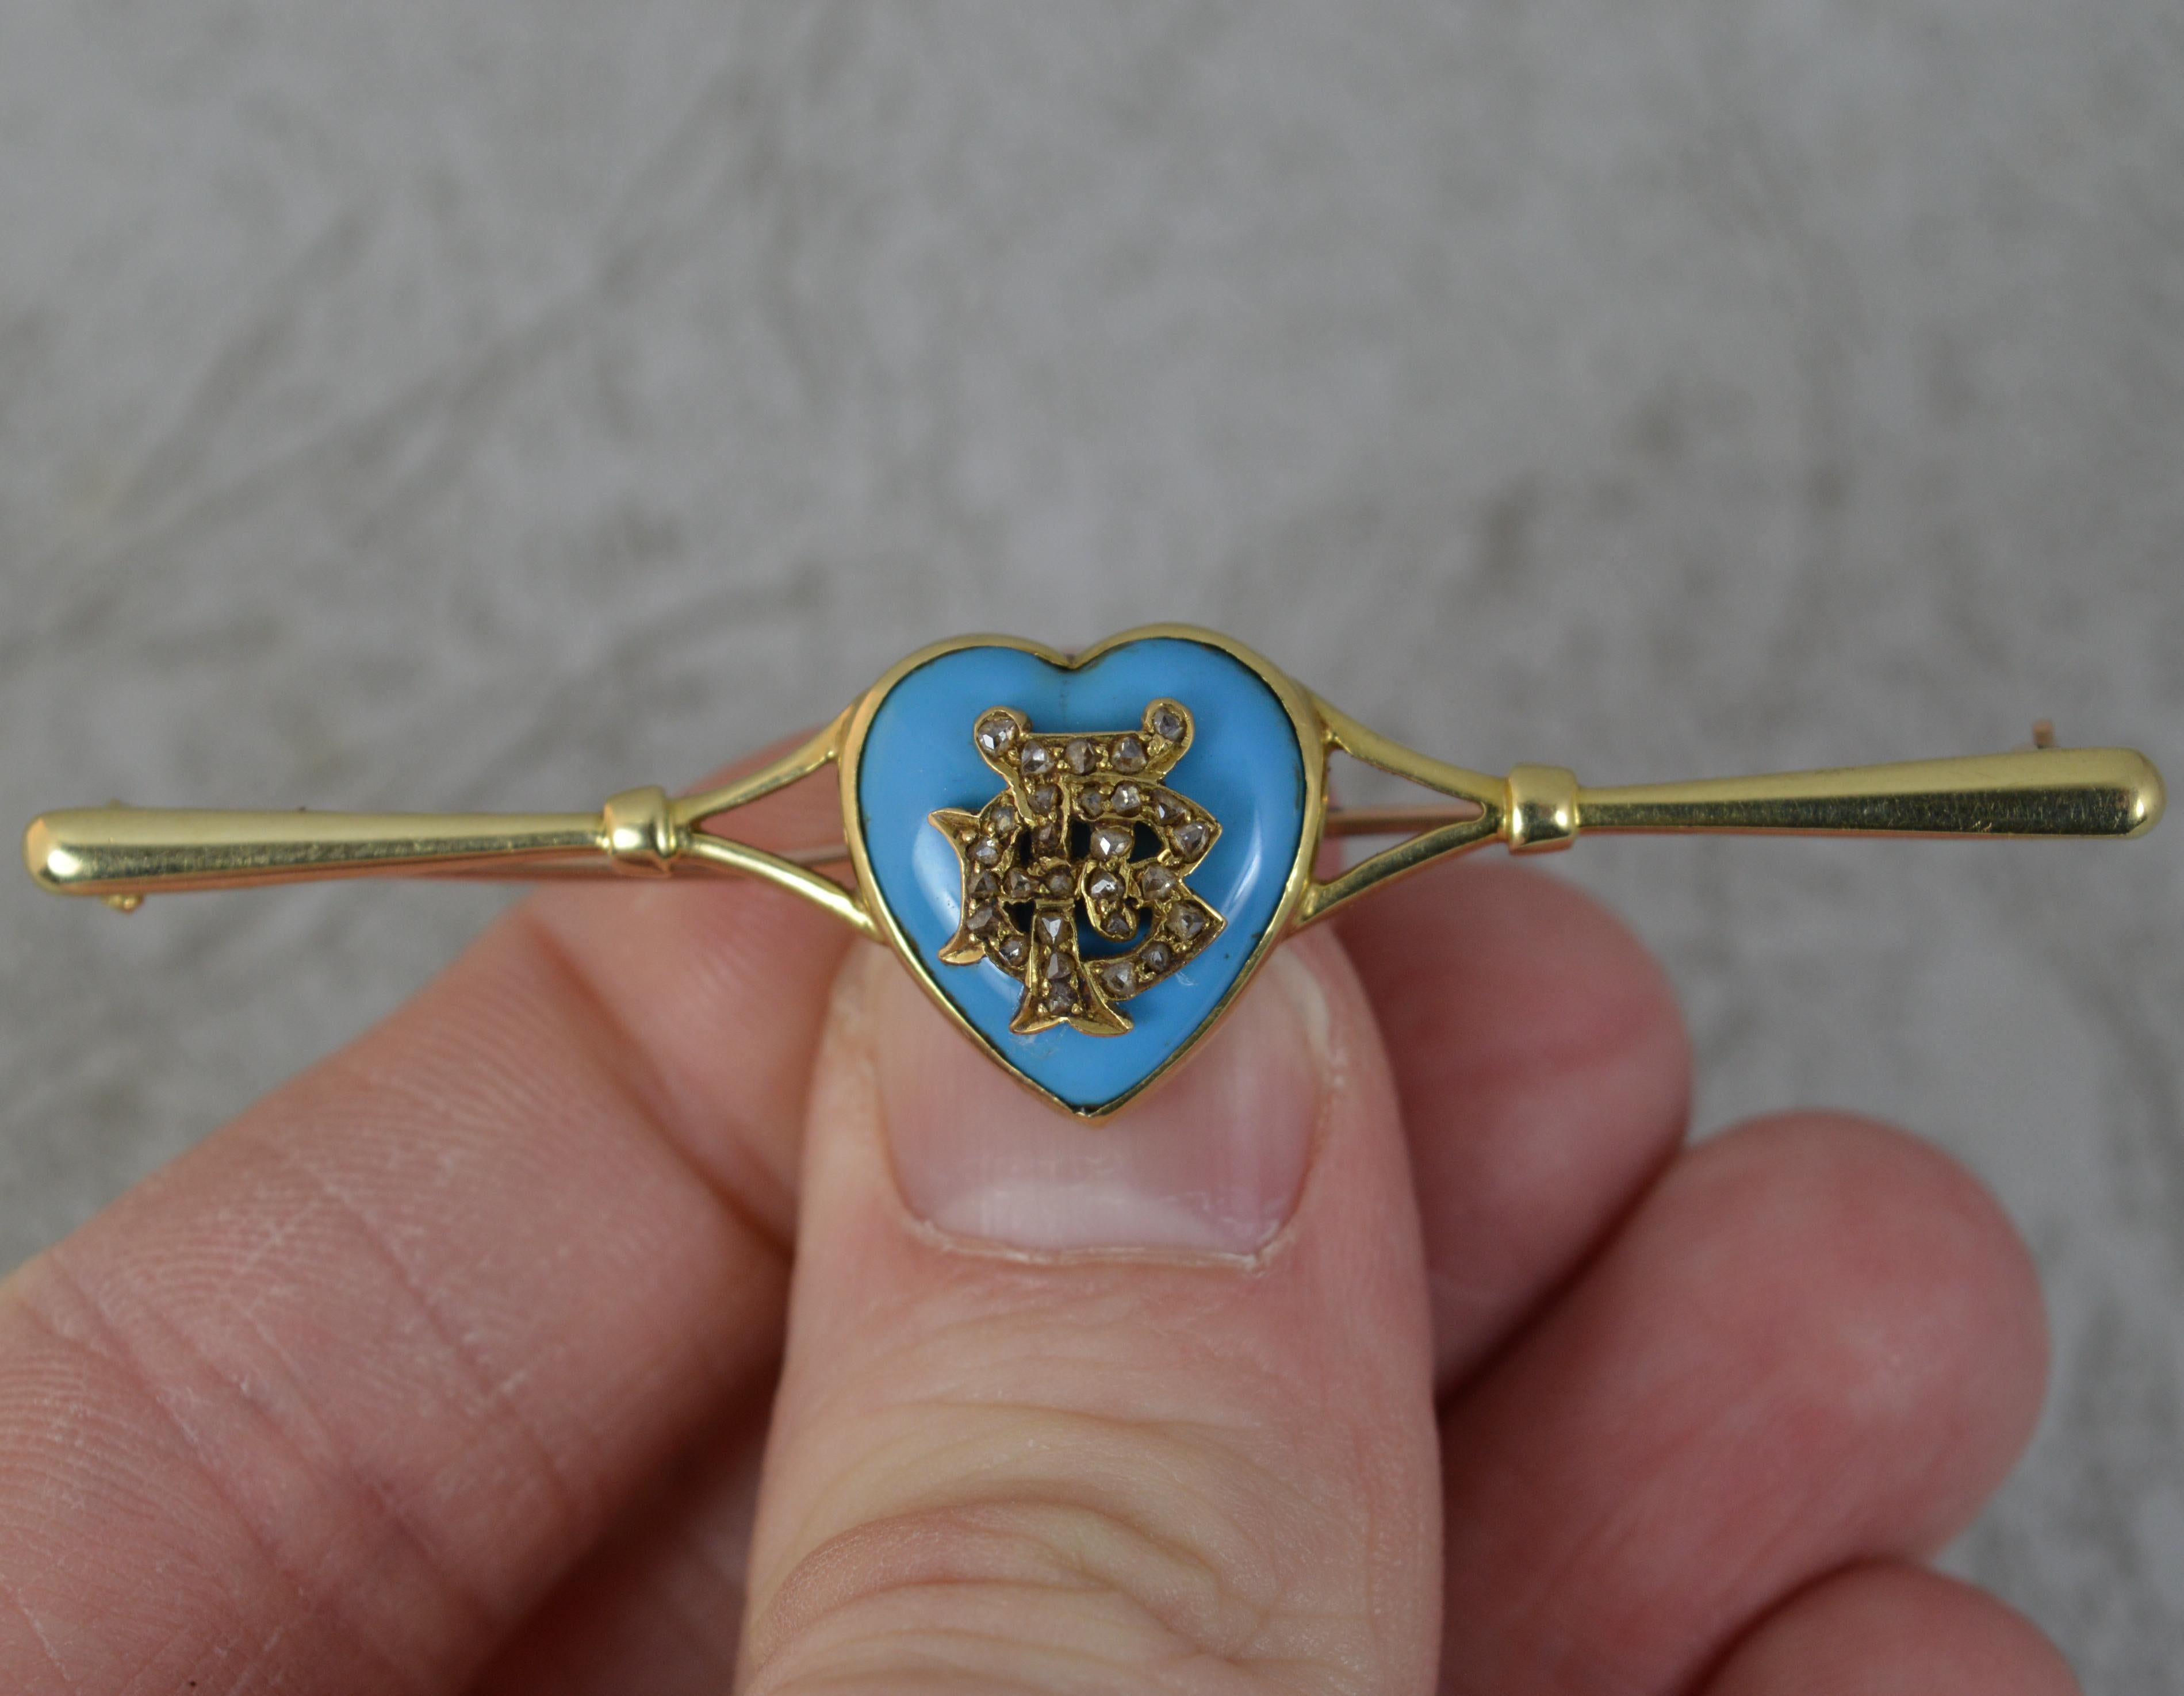 A superb late Victorian period brooch.
Solid 15 carat yellow gold bar brooch.
Designed with an 18ct gold heart to centre. The heart set with a single turquoise stone with diamond encrusted FB initials inset.

CONDITION ; Very good. Securely set